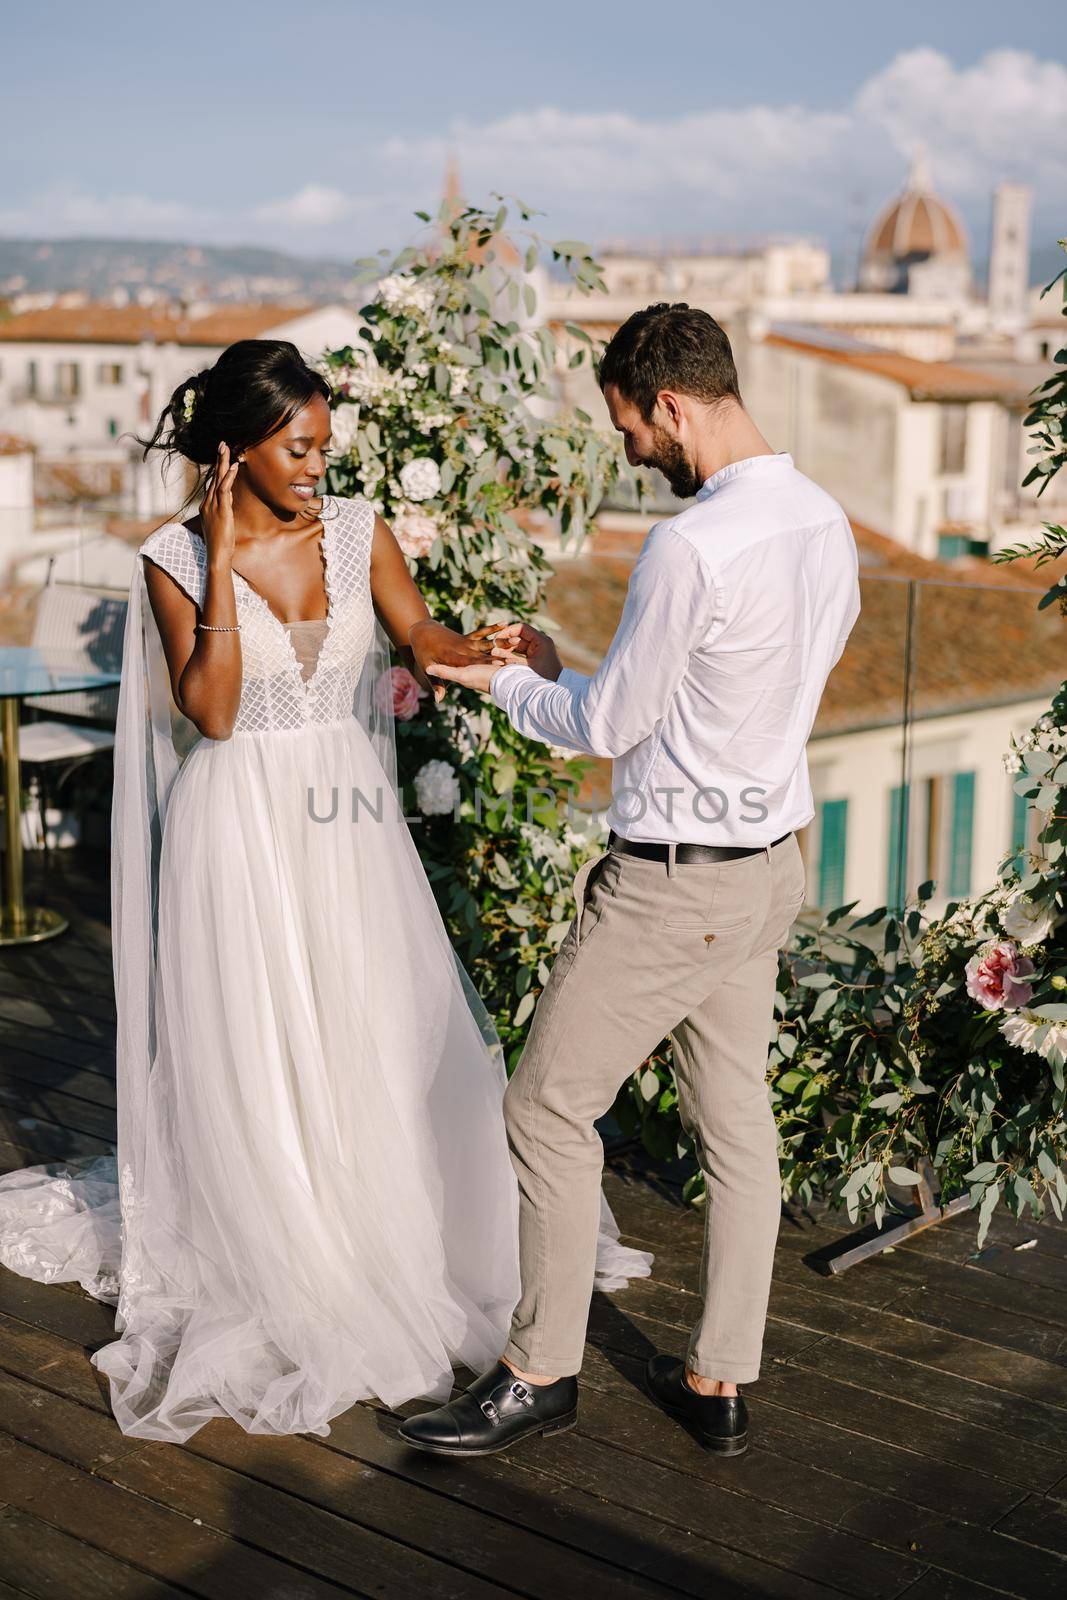 Interracial wedding couple. Destination fine-art wedding in Florence, Italy. A wedding ceremony on the roof of the building, with cityscape views of the city and Cathedral of Santa Maria Del Fiore